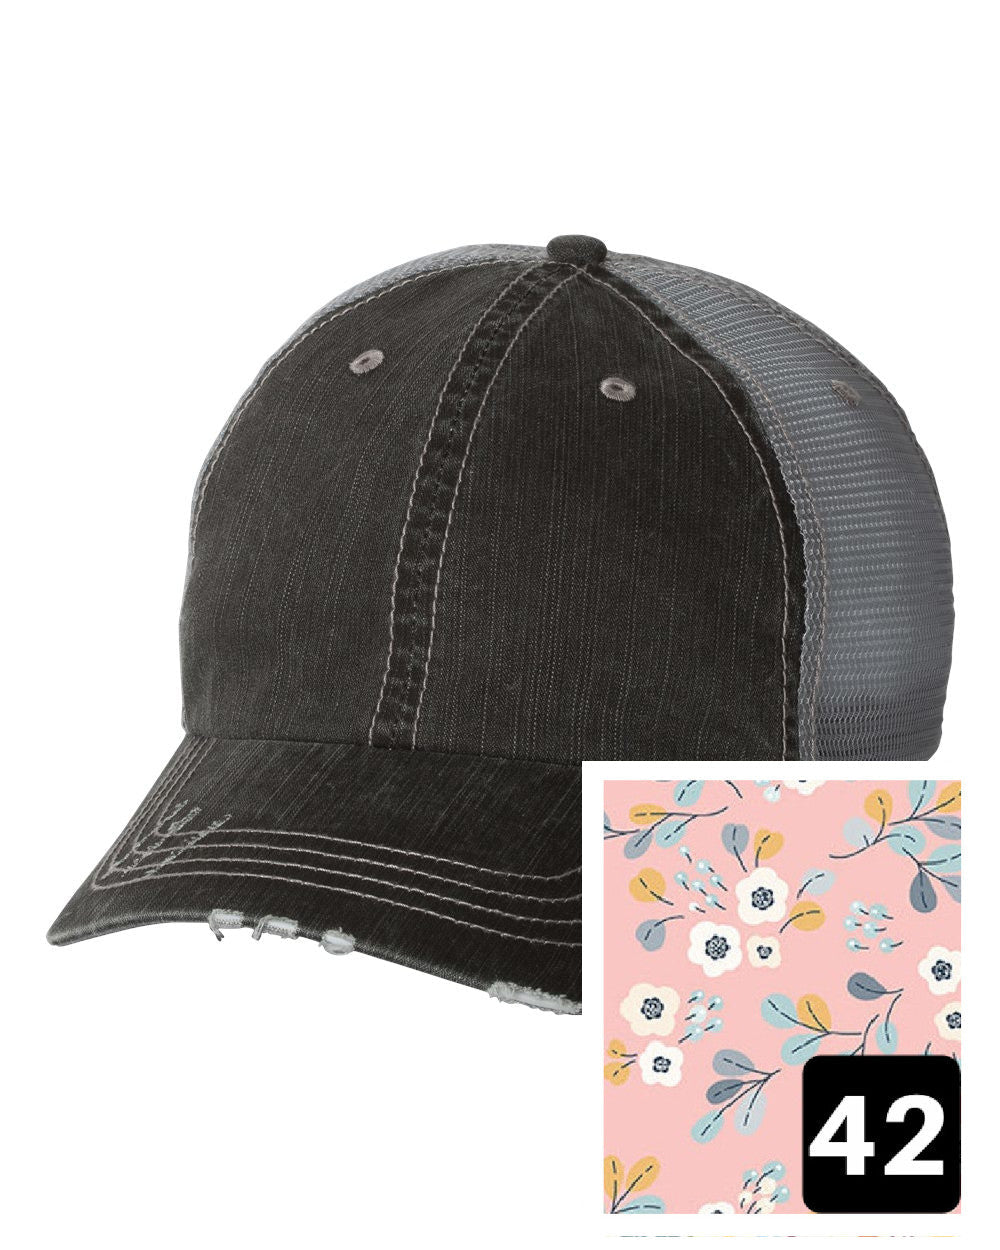 gray distressed trucker hat with light blue and pink mosaic fabric state of Vermont